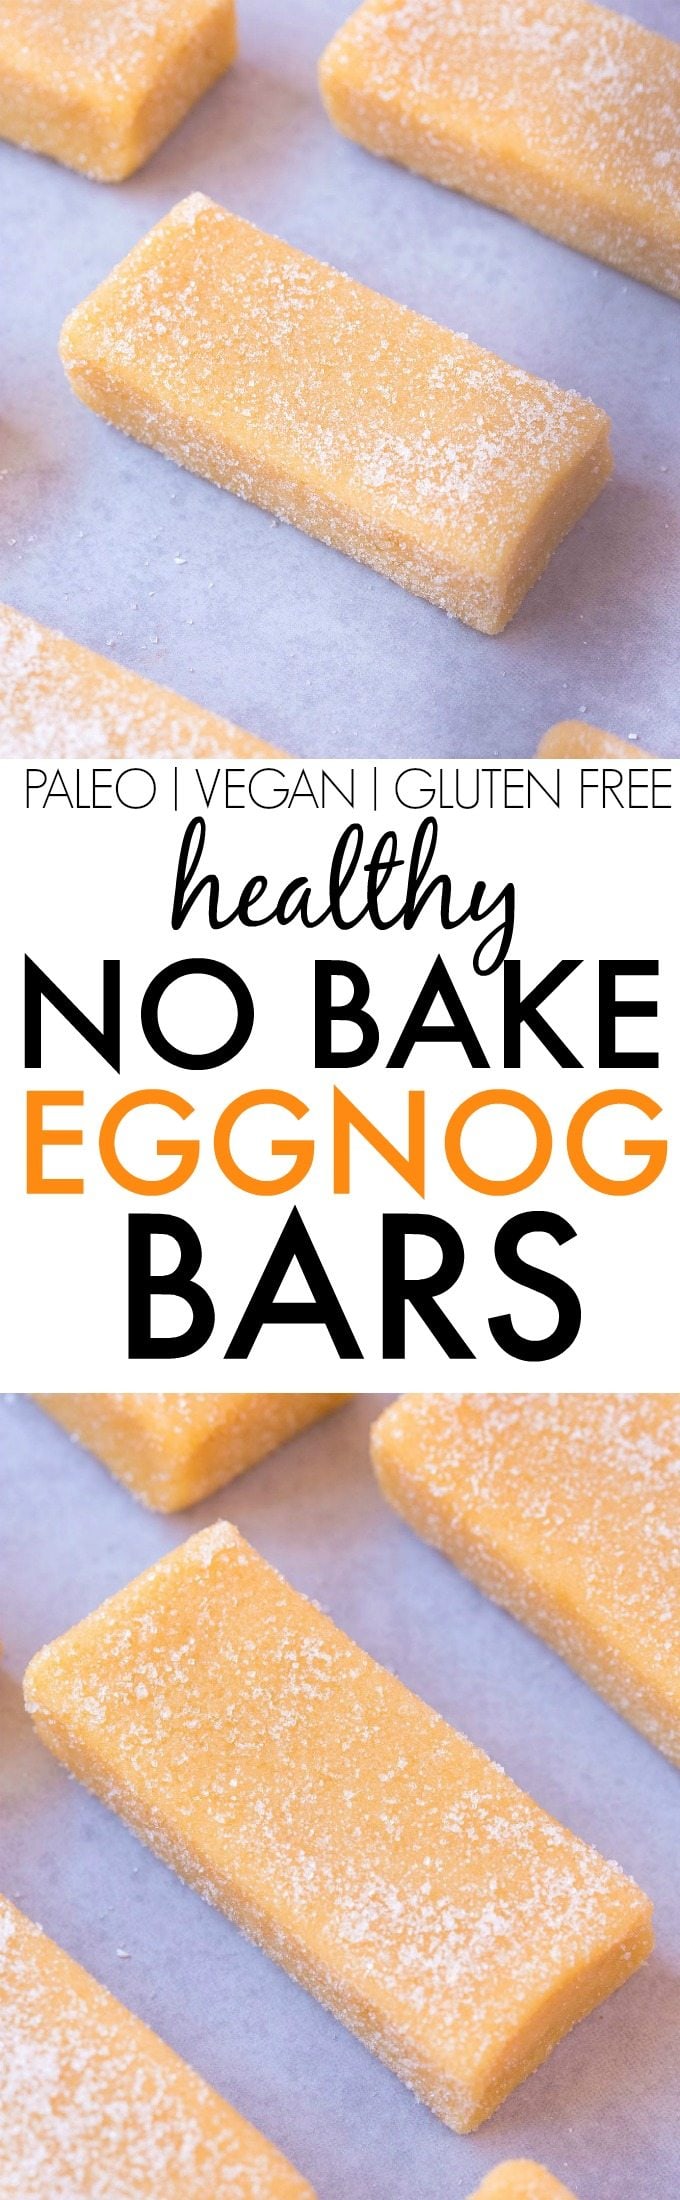 Healthy No Bake Eggnog Bars- Super chewy and delicious bars LOADED with protein and fiber but ZERO sugar, dairy, grains or butter- The PERFECT Snack or dessert! {vegan, gluten free, paleo recipe}- thebigmansworld.com